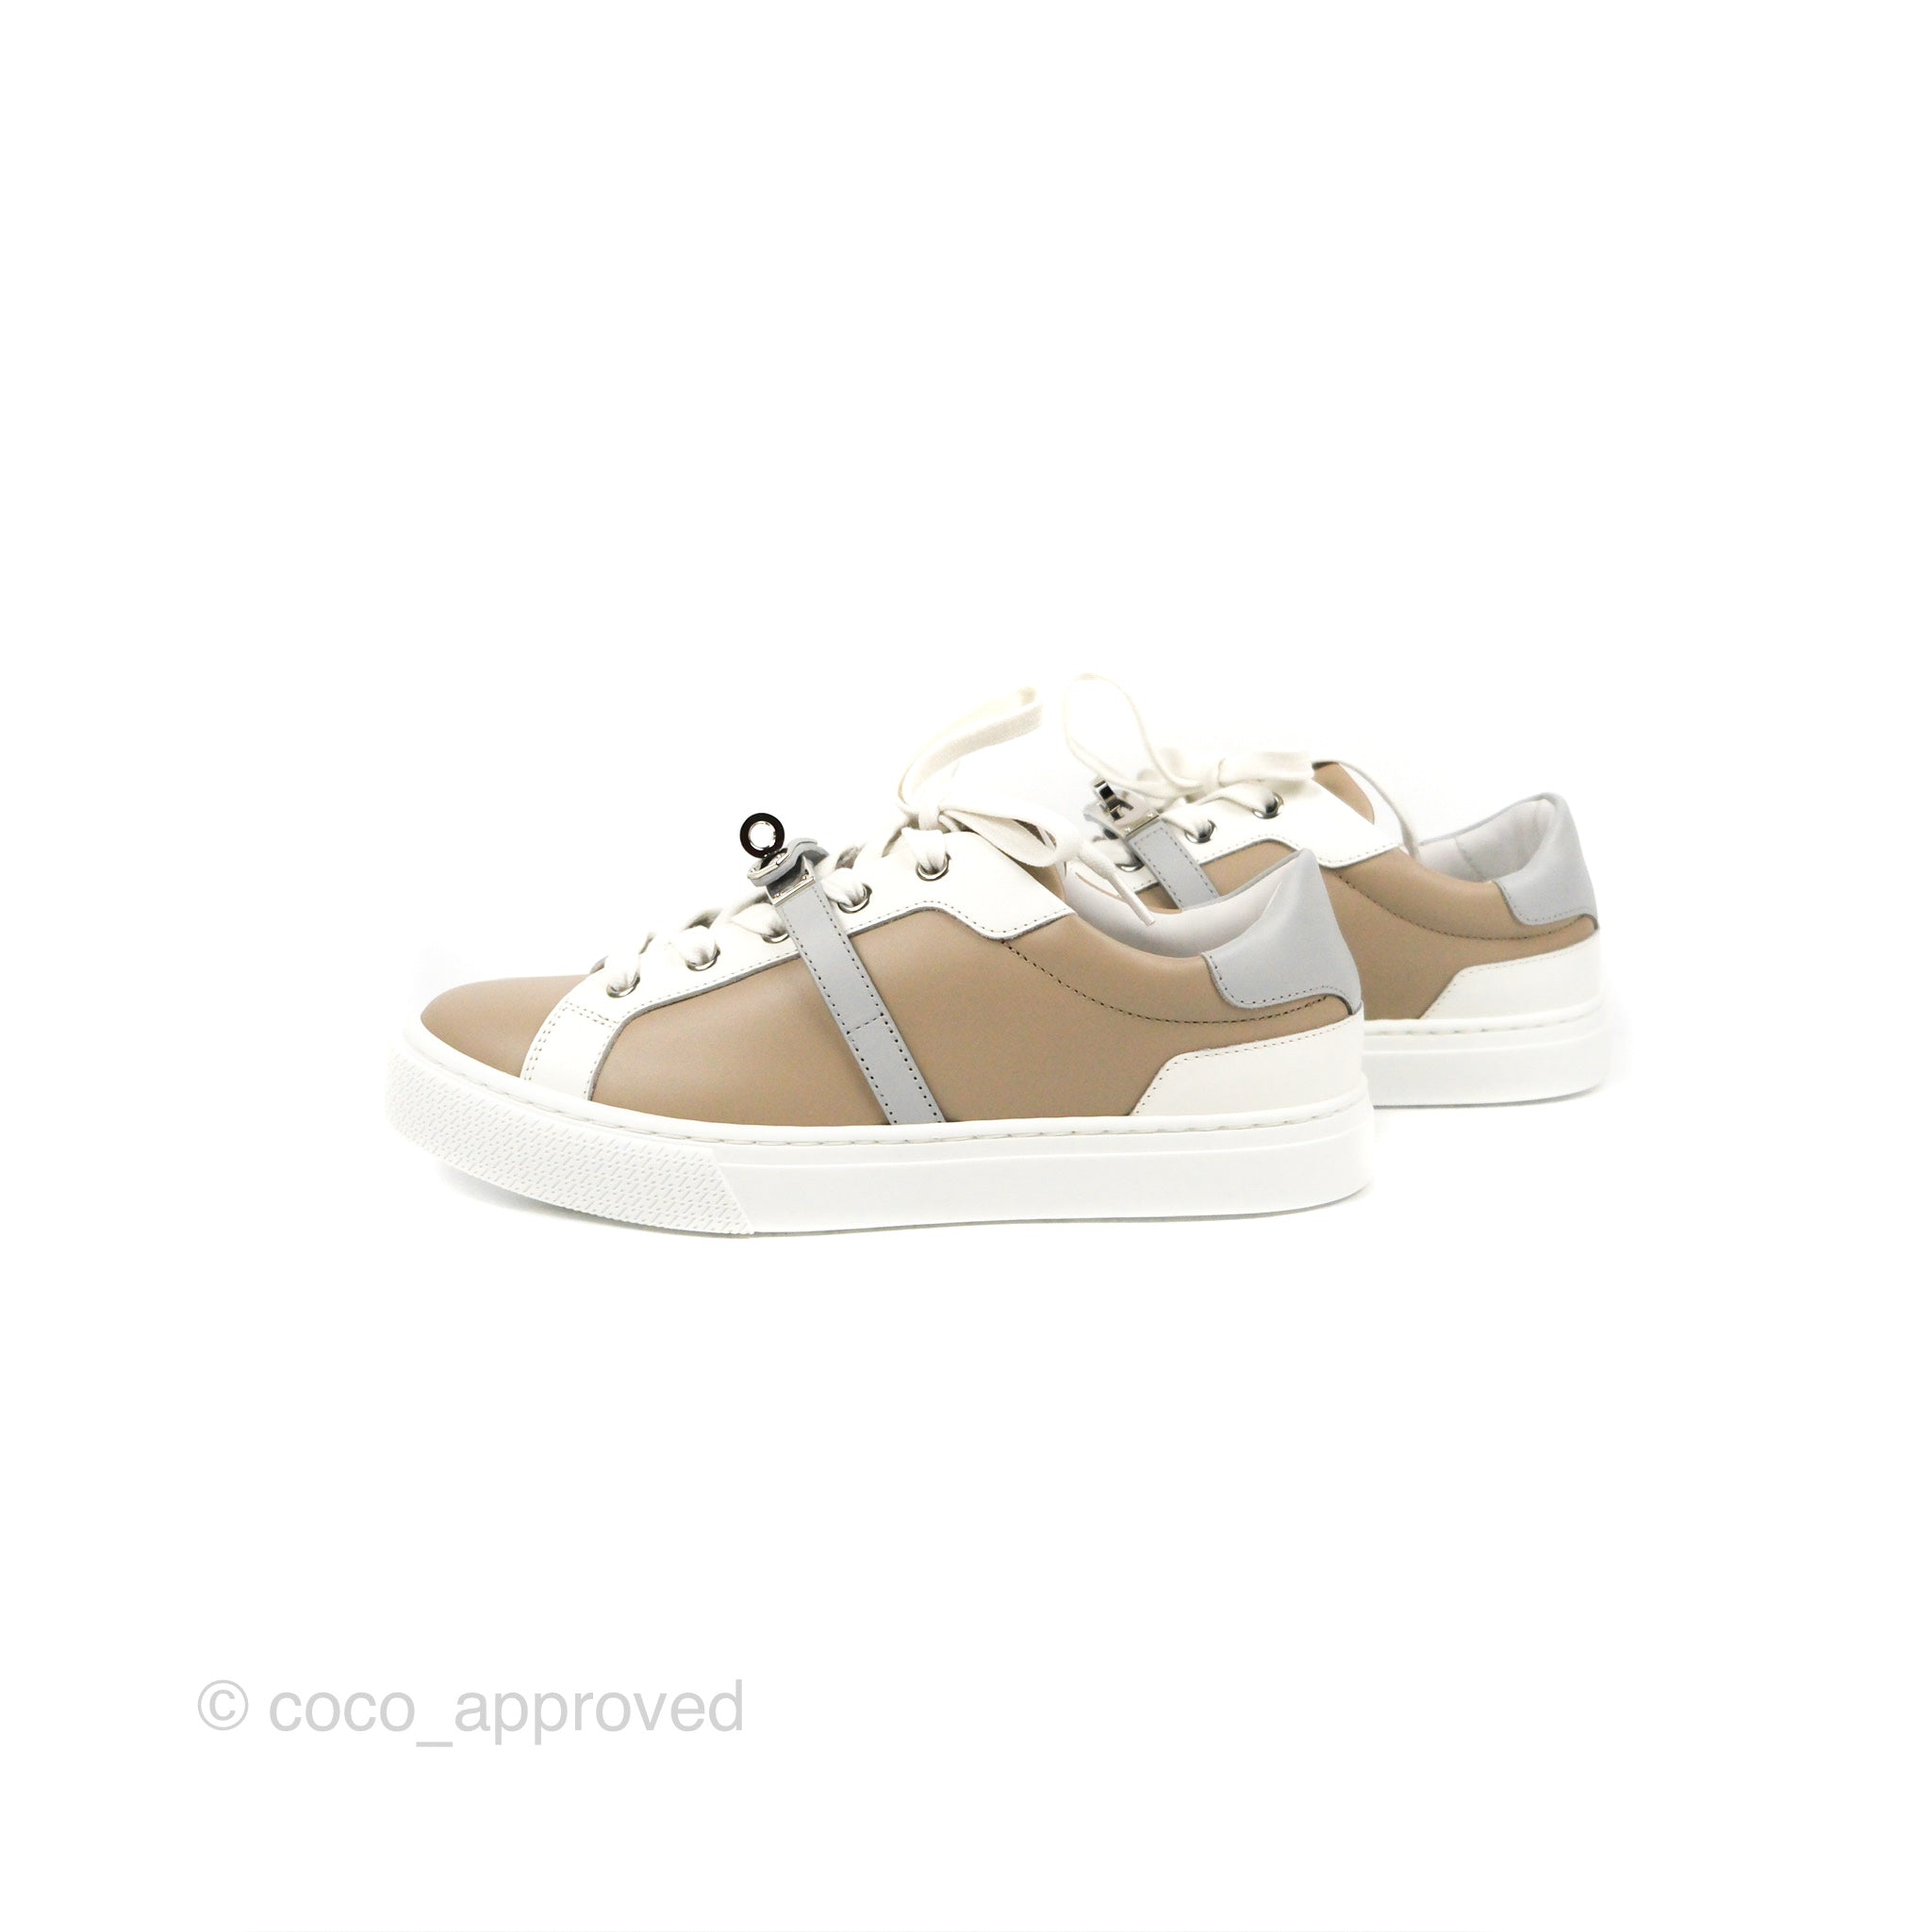 Hermes, Shoes, Hermes Day Sneakers Beige White Cream Tri Color Limited